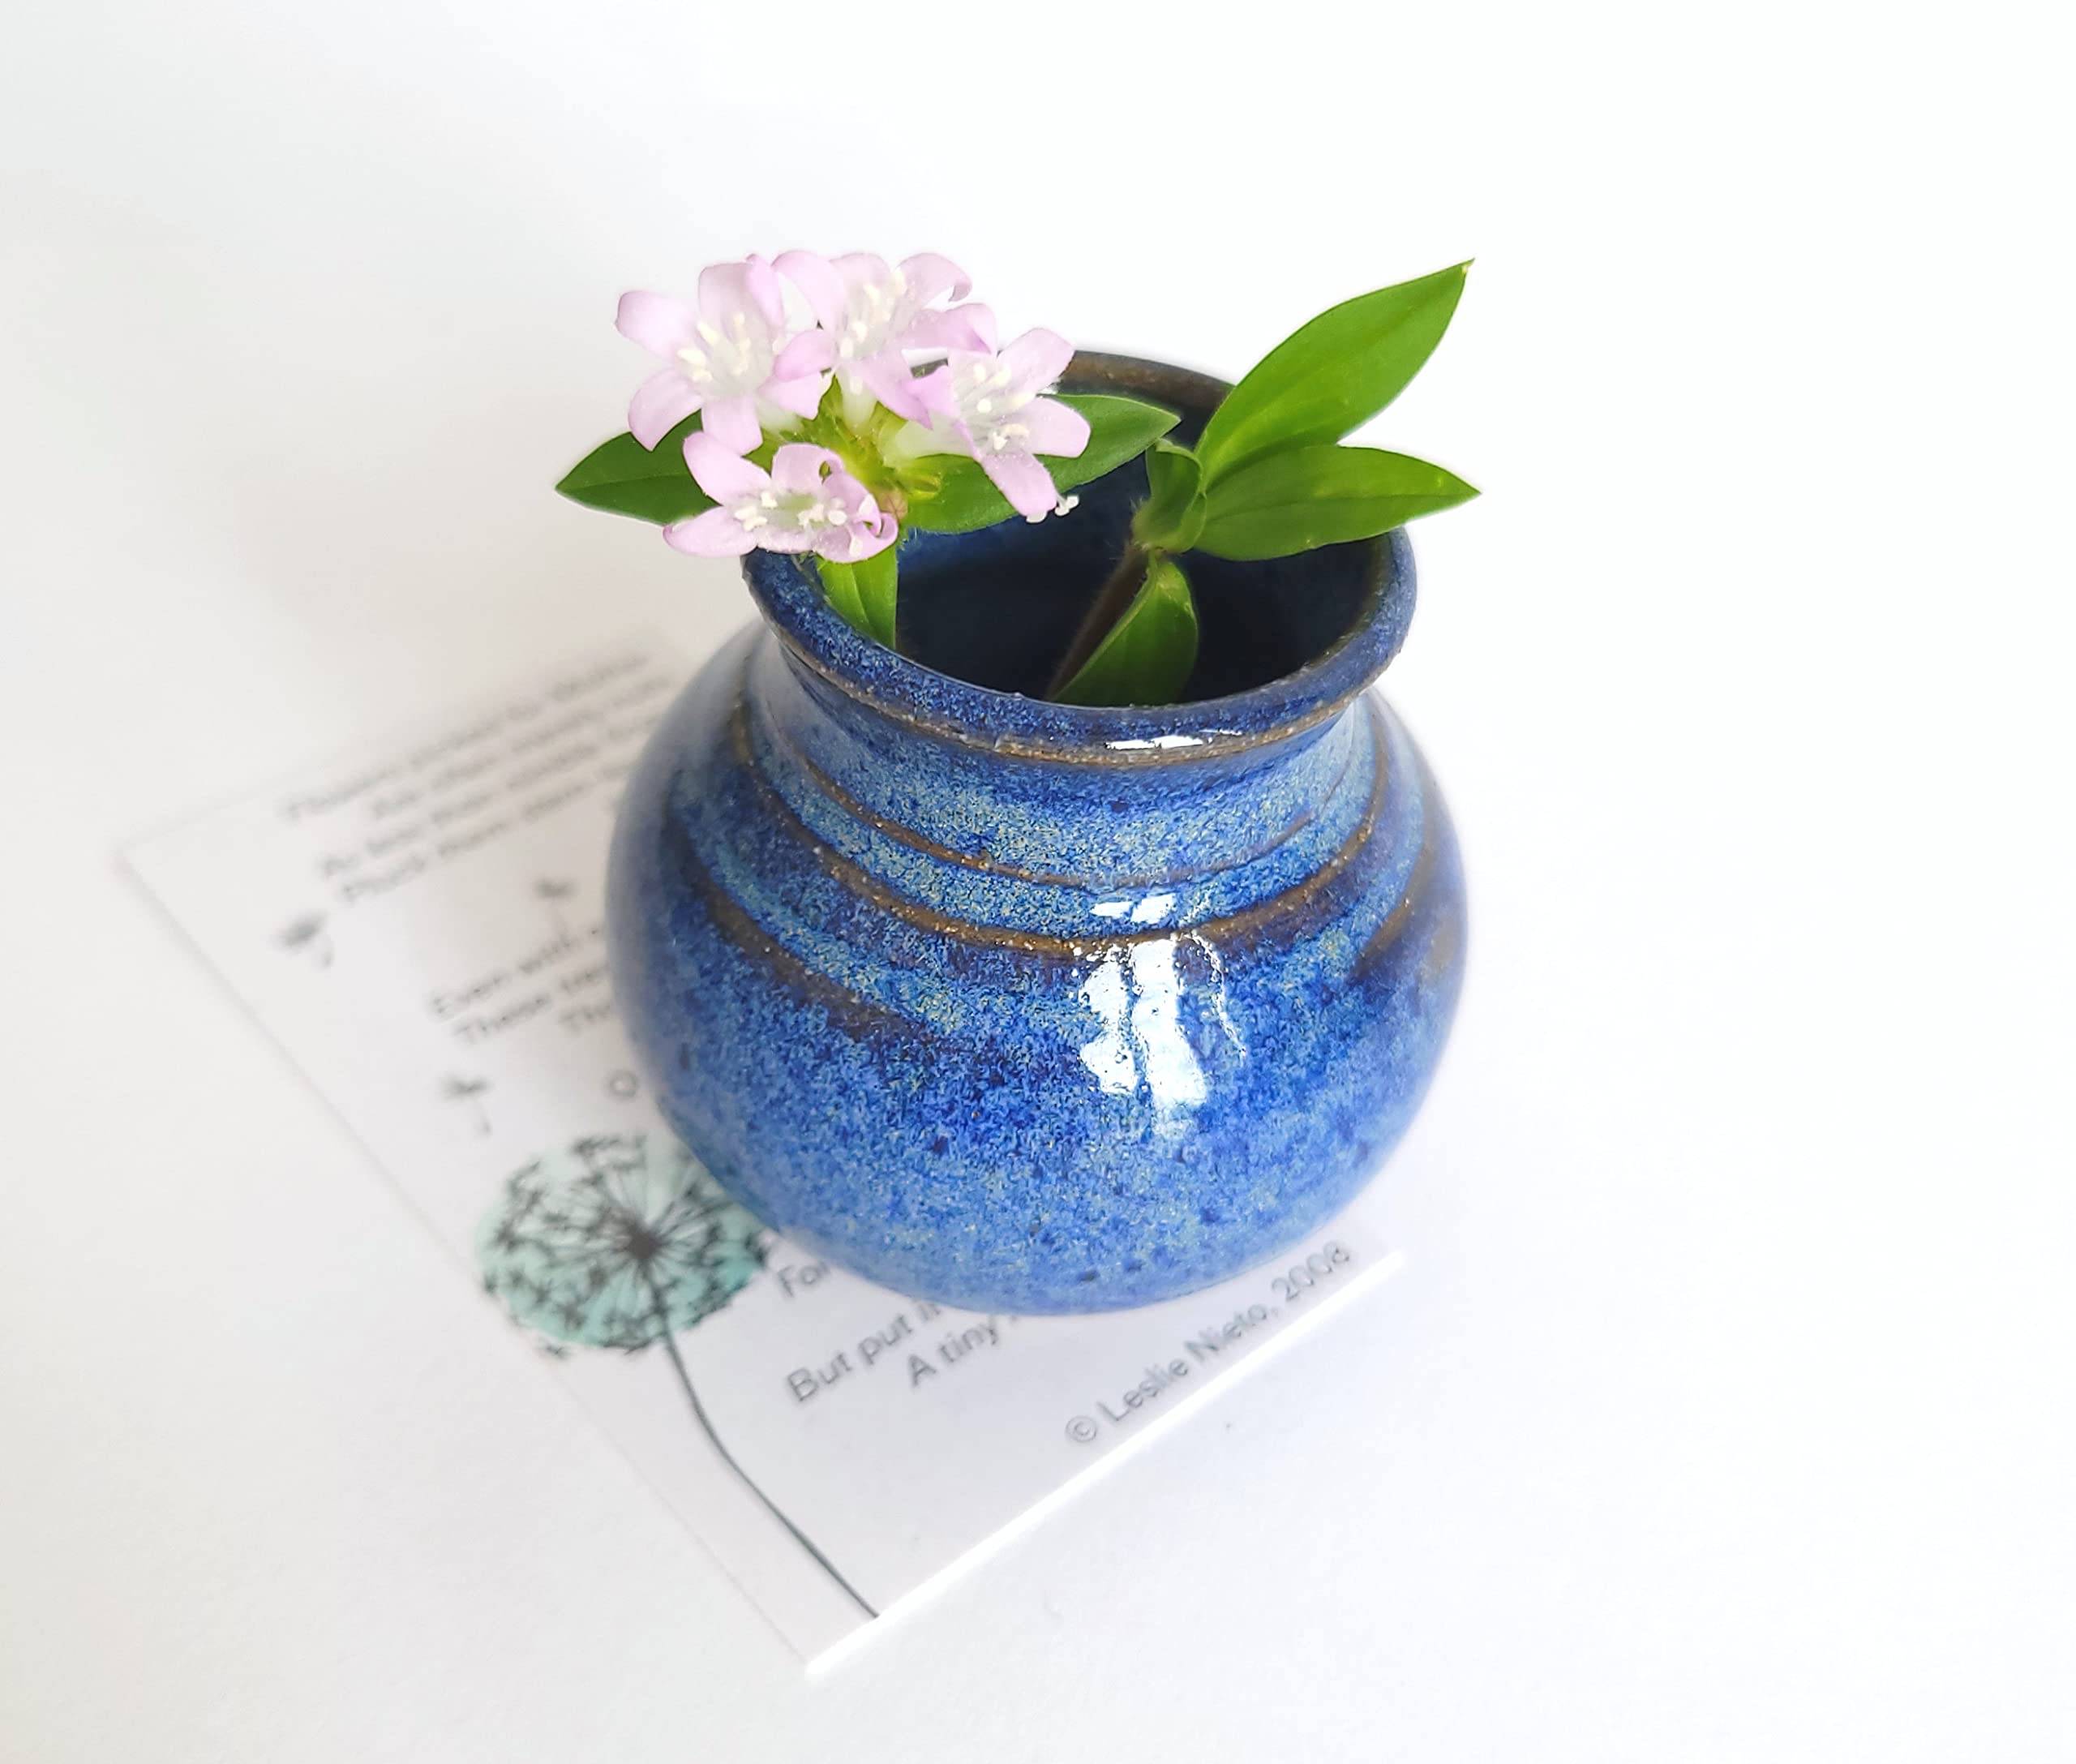 Unique Hand Made Pottery Vase w Poetry Card - Cute Country Farmhouse Style Mini Flower Pot - Gifts for Moms Rustic Home Blue